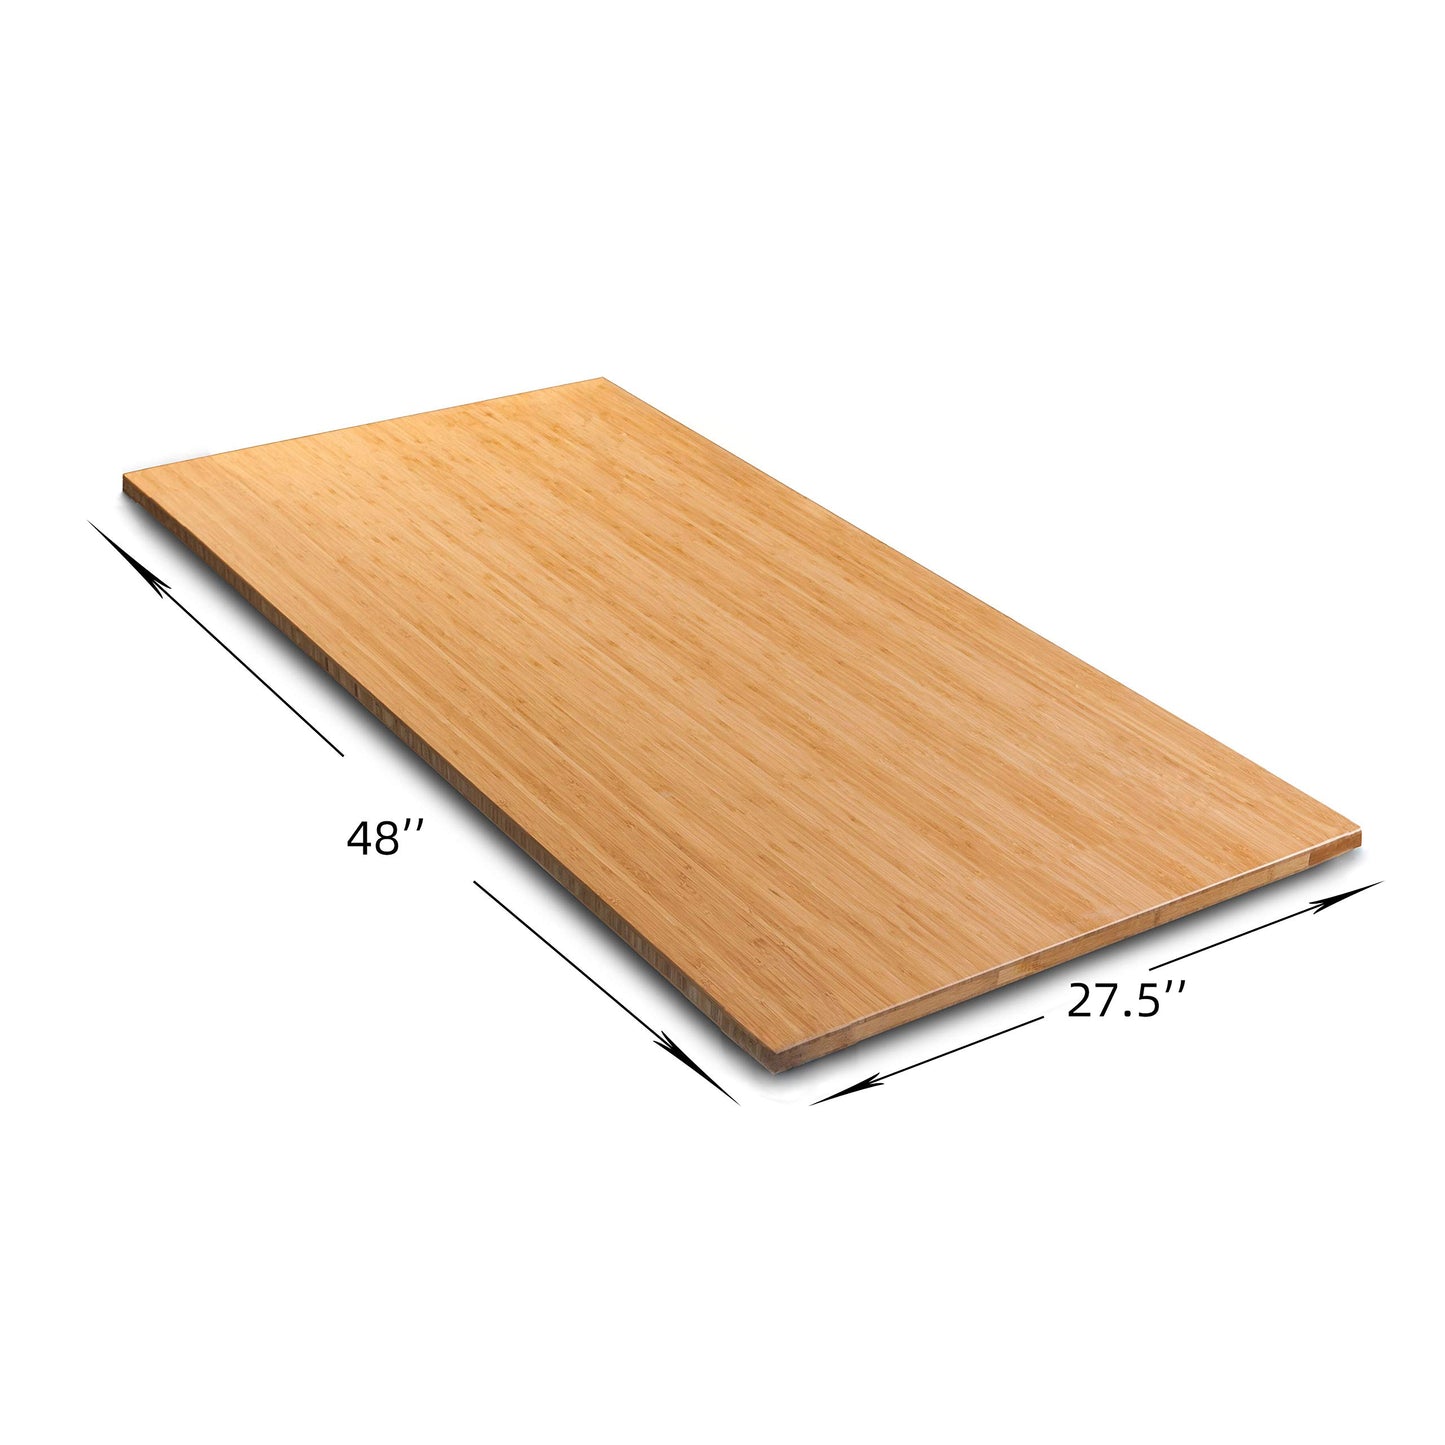 VWINDESK 48 x 27.5 x 1 Inch 100% Solid Bamboo Desk Table Top Only,for Standing Desk Home Office Desk(Right Angle)